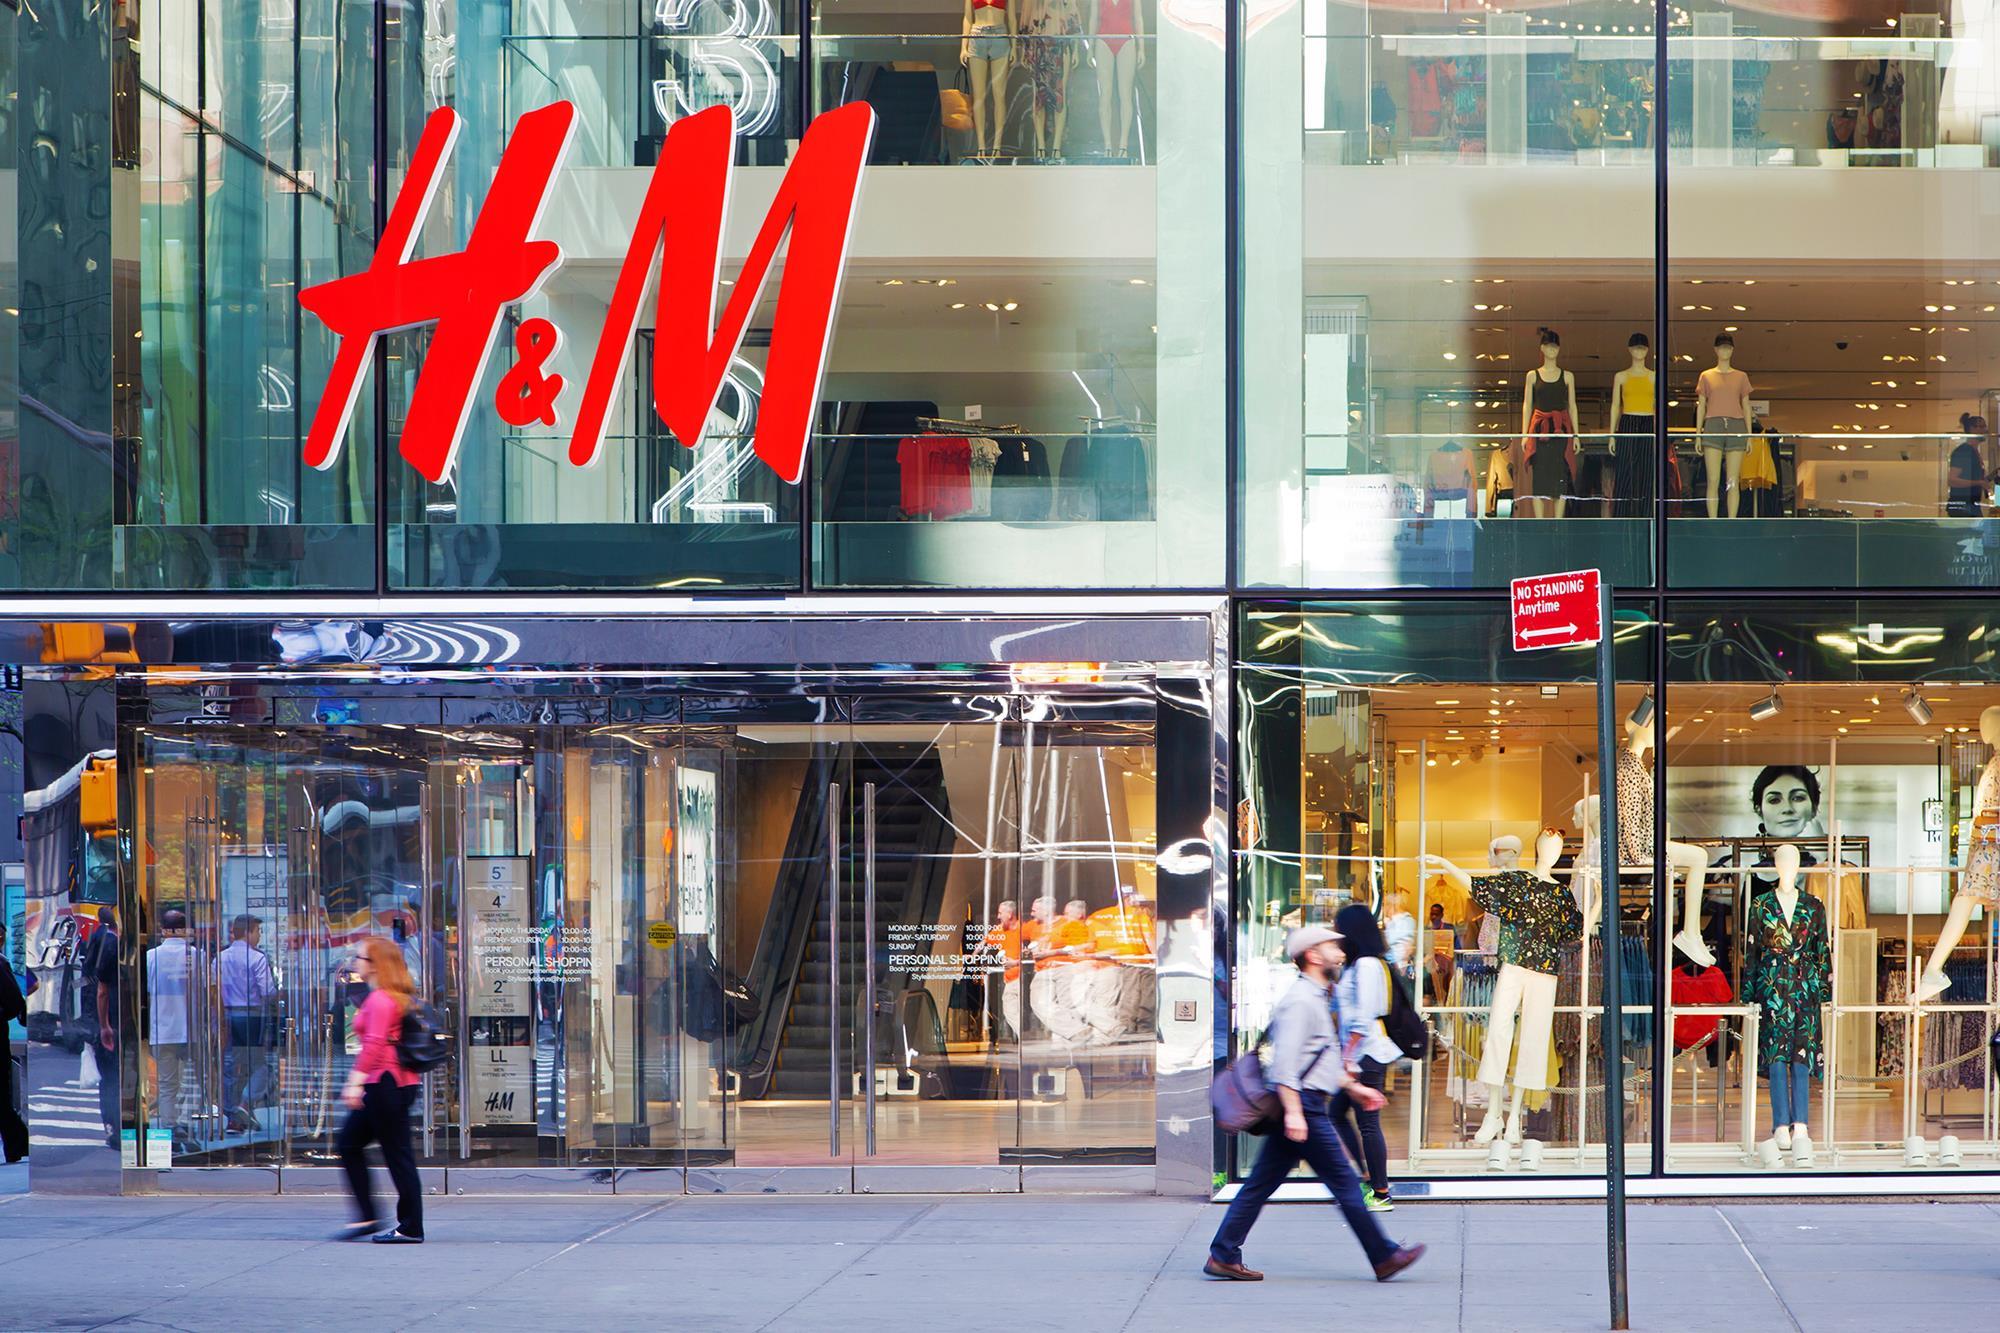 H&M HOME opens unique concept store in Berlin - H&M Group